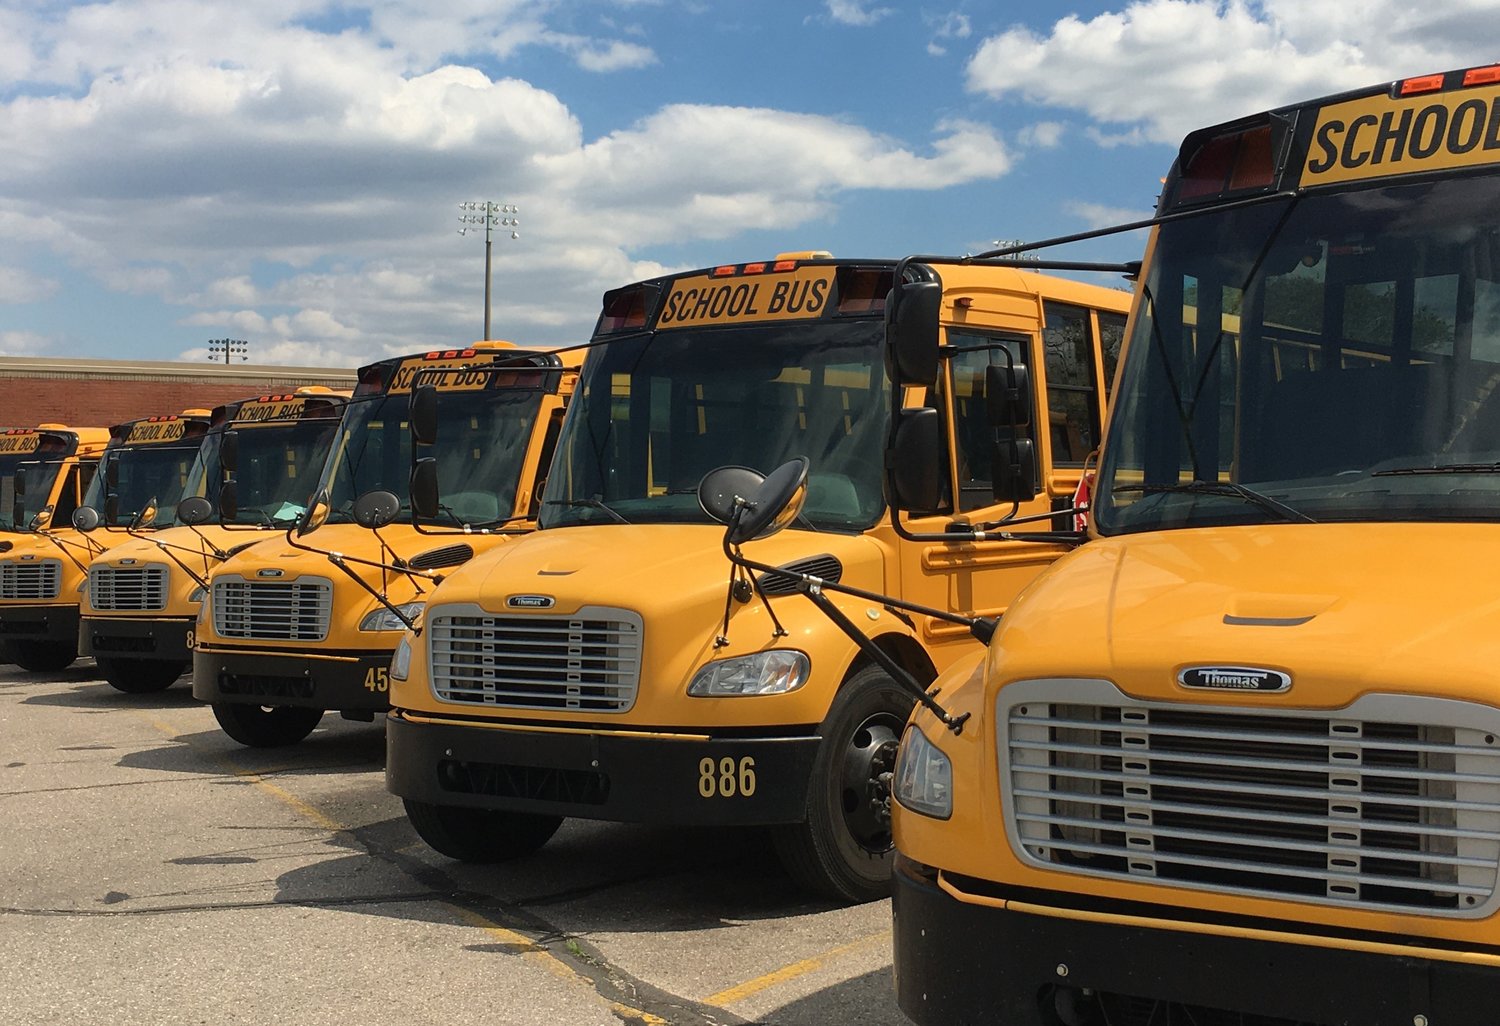 Cumberland County school buses would be equipped with two-way radios under a policy approved by a school board committee on Tuesday.